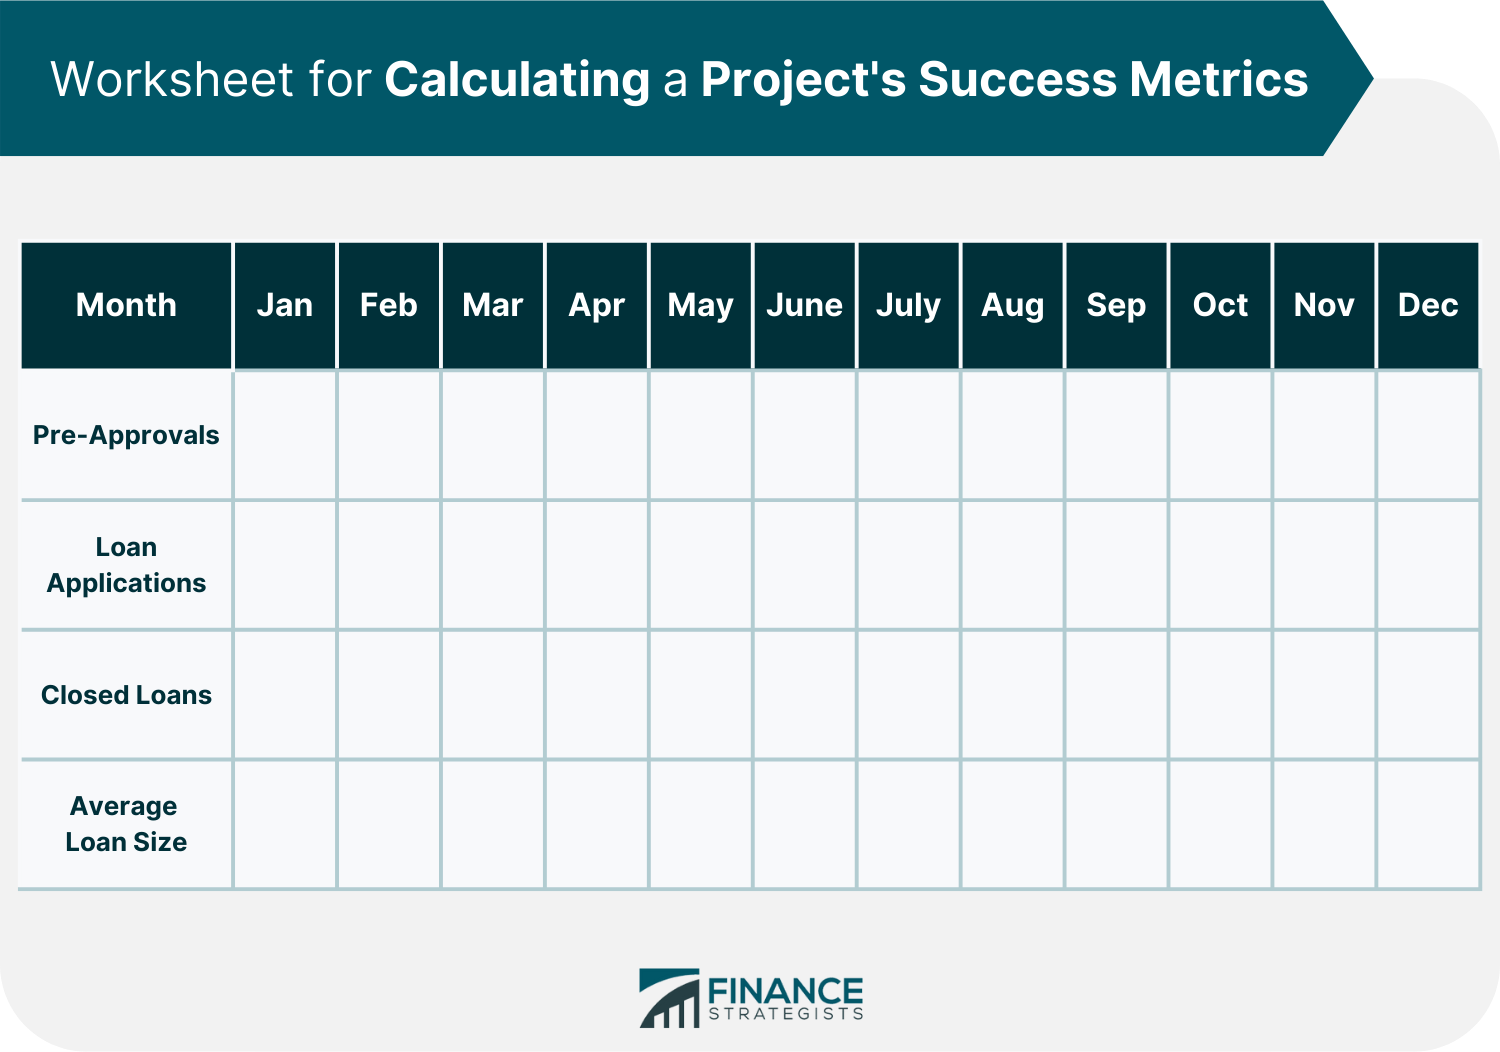 Worksheet for Calculating a Project's Success Metrics